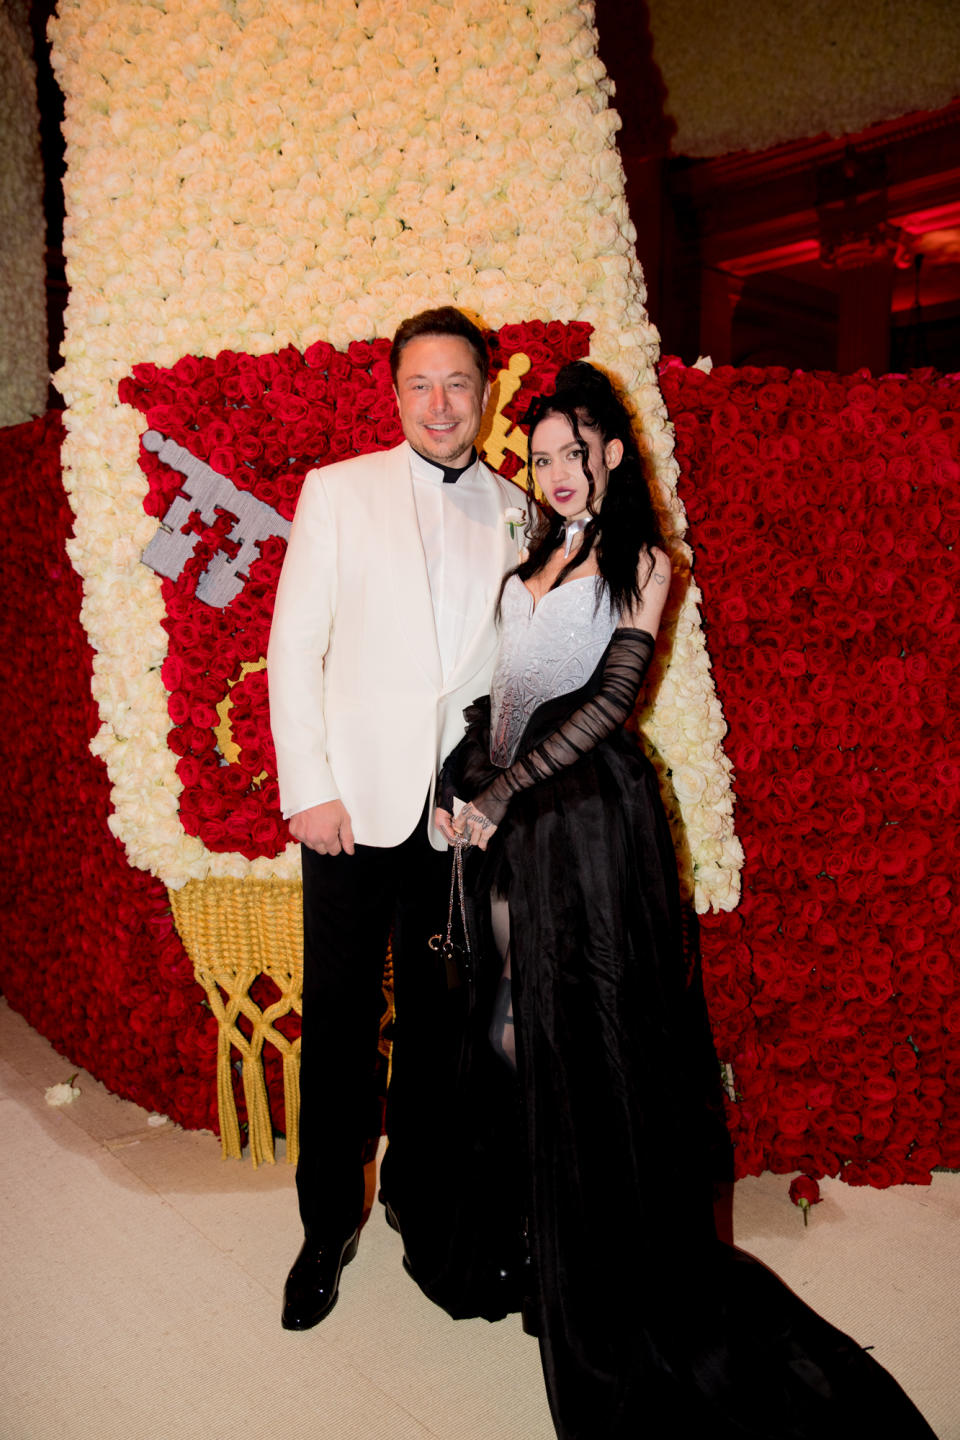 NEW YORK, NY - MAY 07: Elon Musk and Grimes attend the Heavenly Bodies: Fashion & The Catholic Imagination Costume Institute Gala at The Metropolitan Museum of Art on May 7, 2018 in New York City.  (Photo by Kevin Tachman/Getty Images for Vogue)